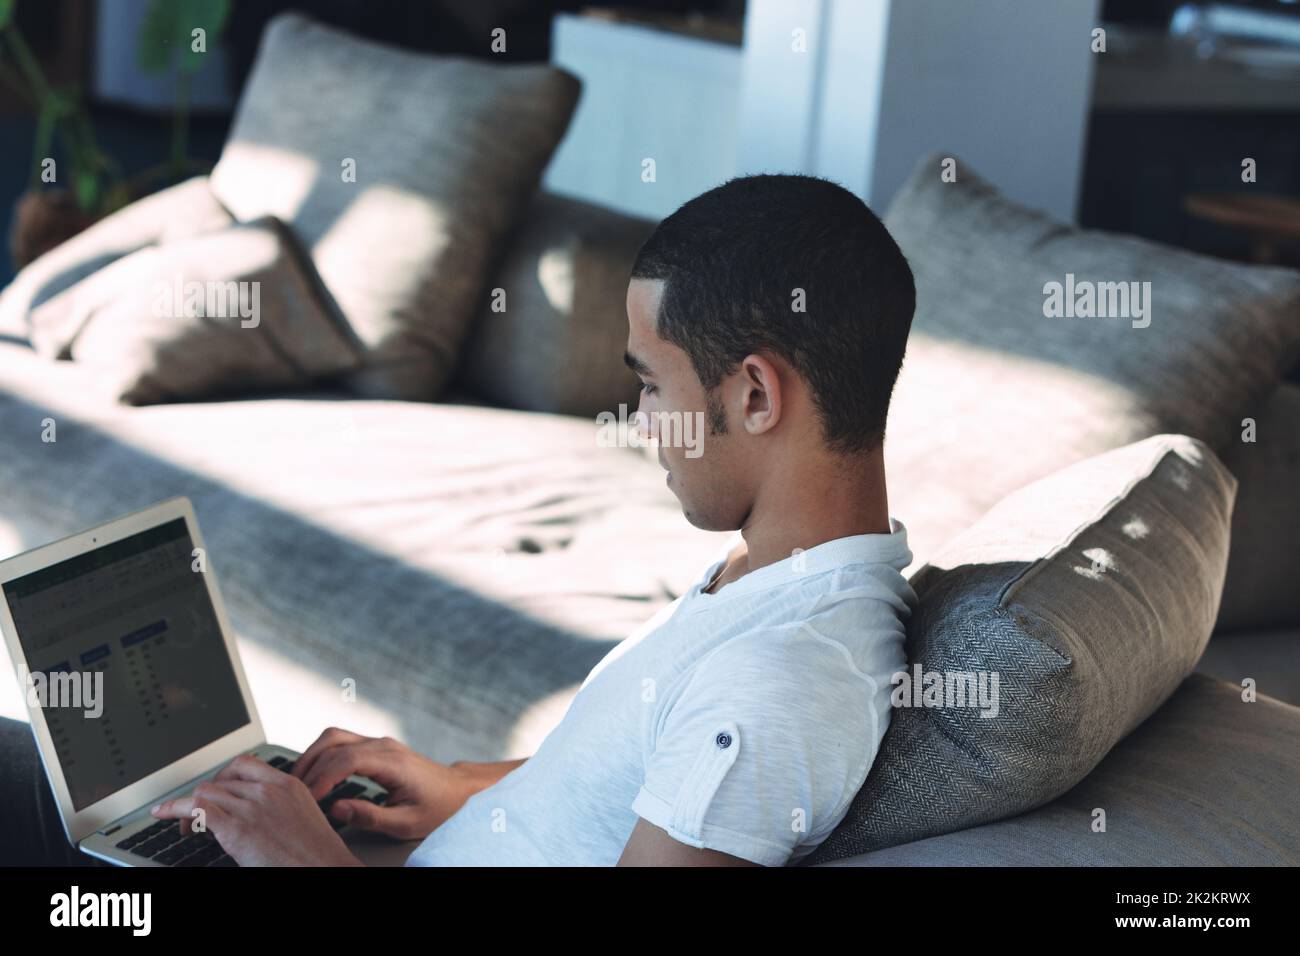 Young Black man telecommuting or working from home on a laptop Stock Photo